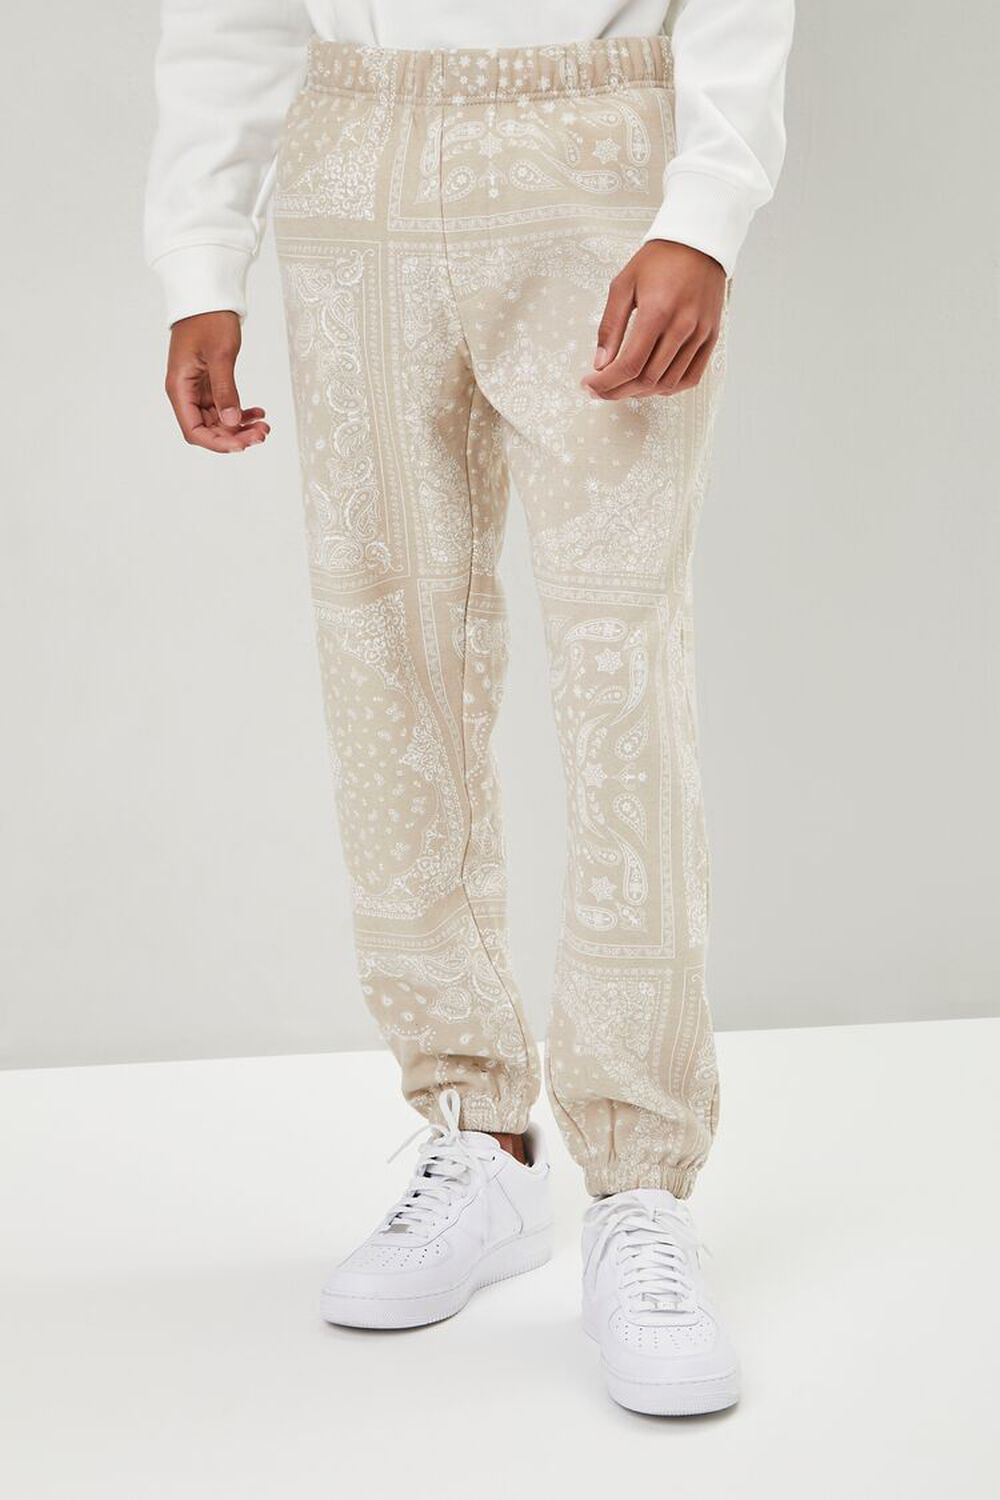 TAUPE/CREAM French Terry Joggers, image 2